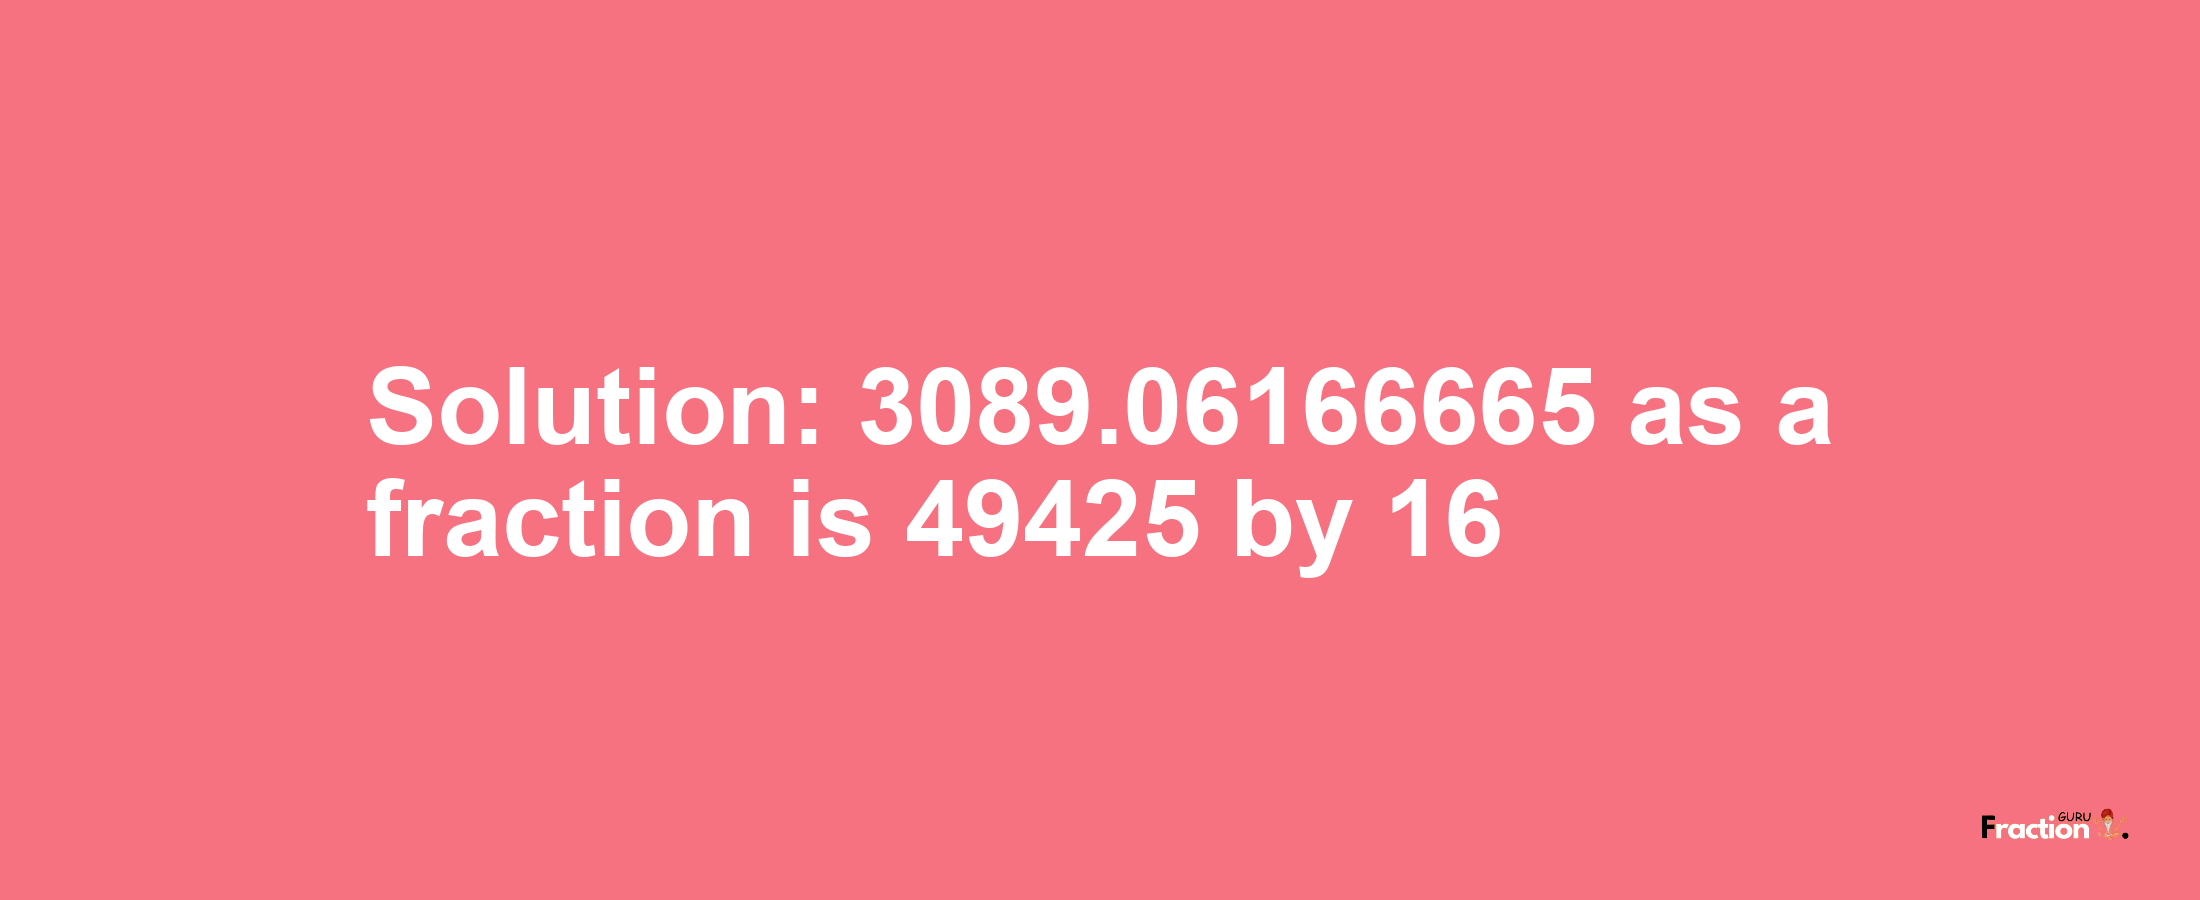 Solution:3089.06166665 as a fraction is 49425/16